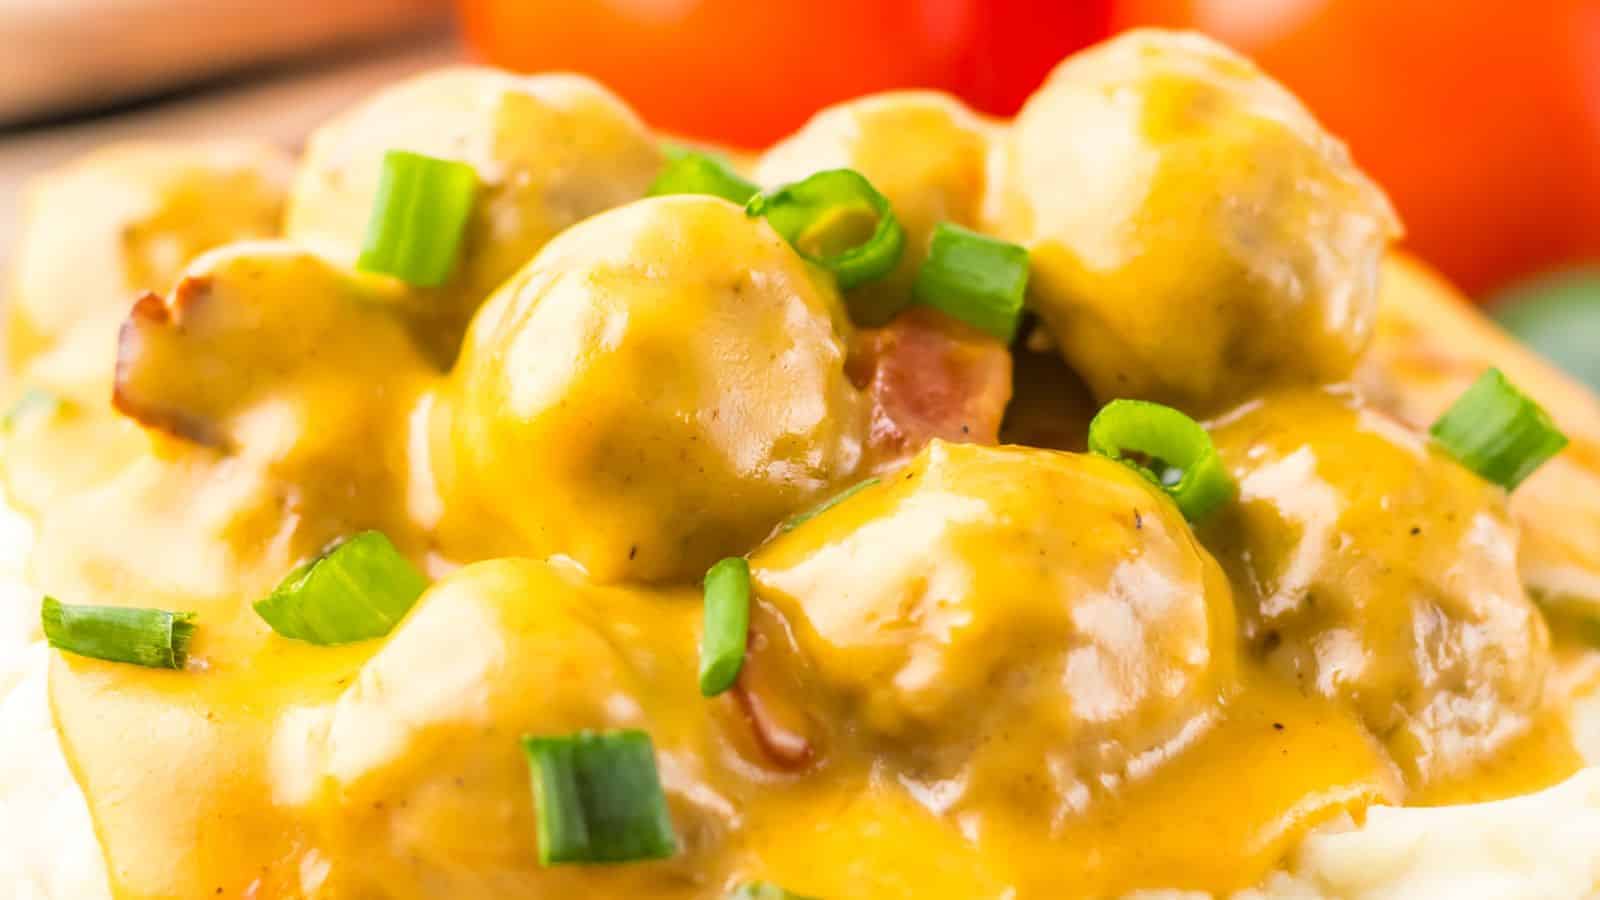 Close-up of meatballs covered in a rich, creamy yellow sauce, garnished with chopped green onions.